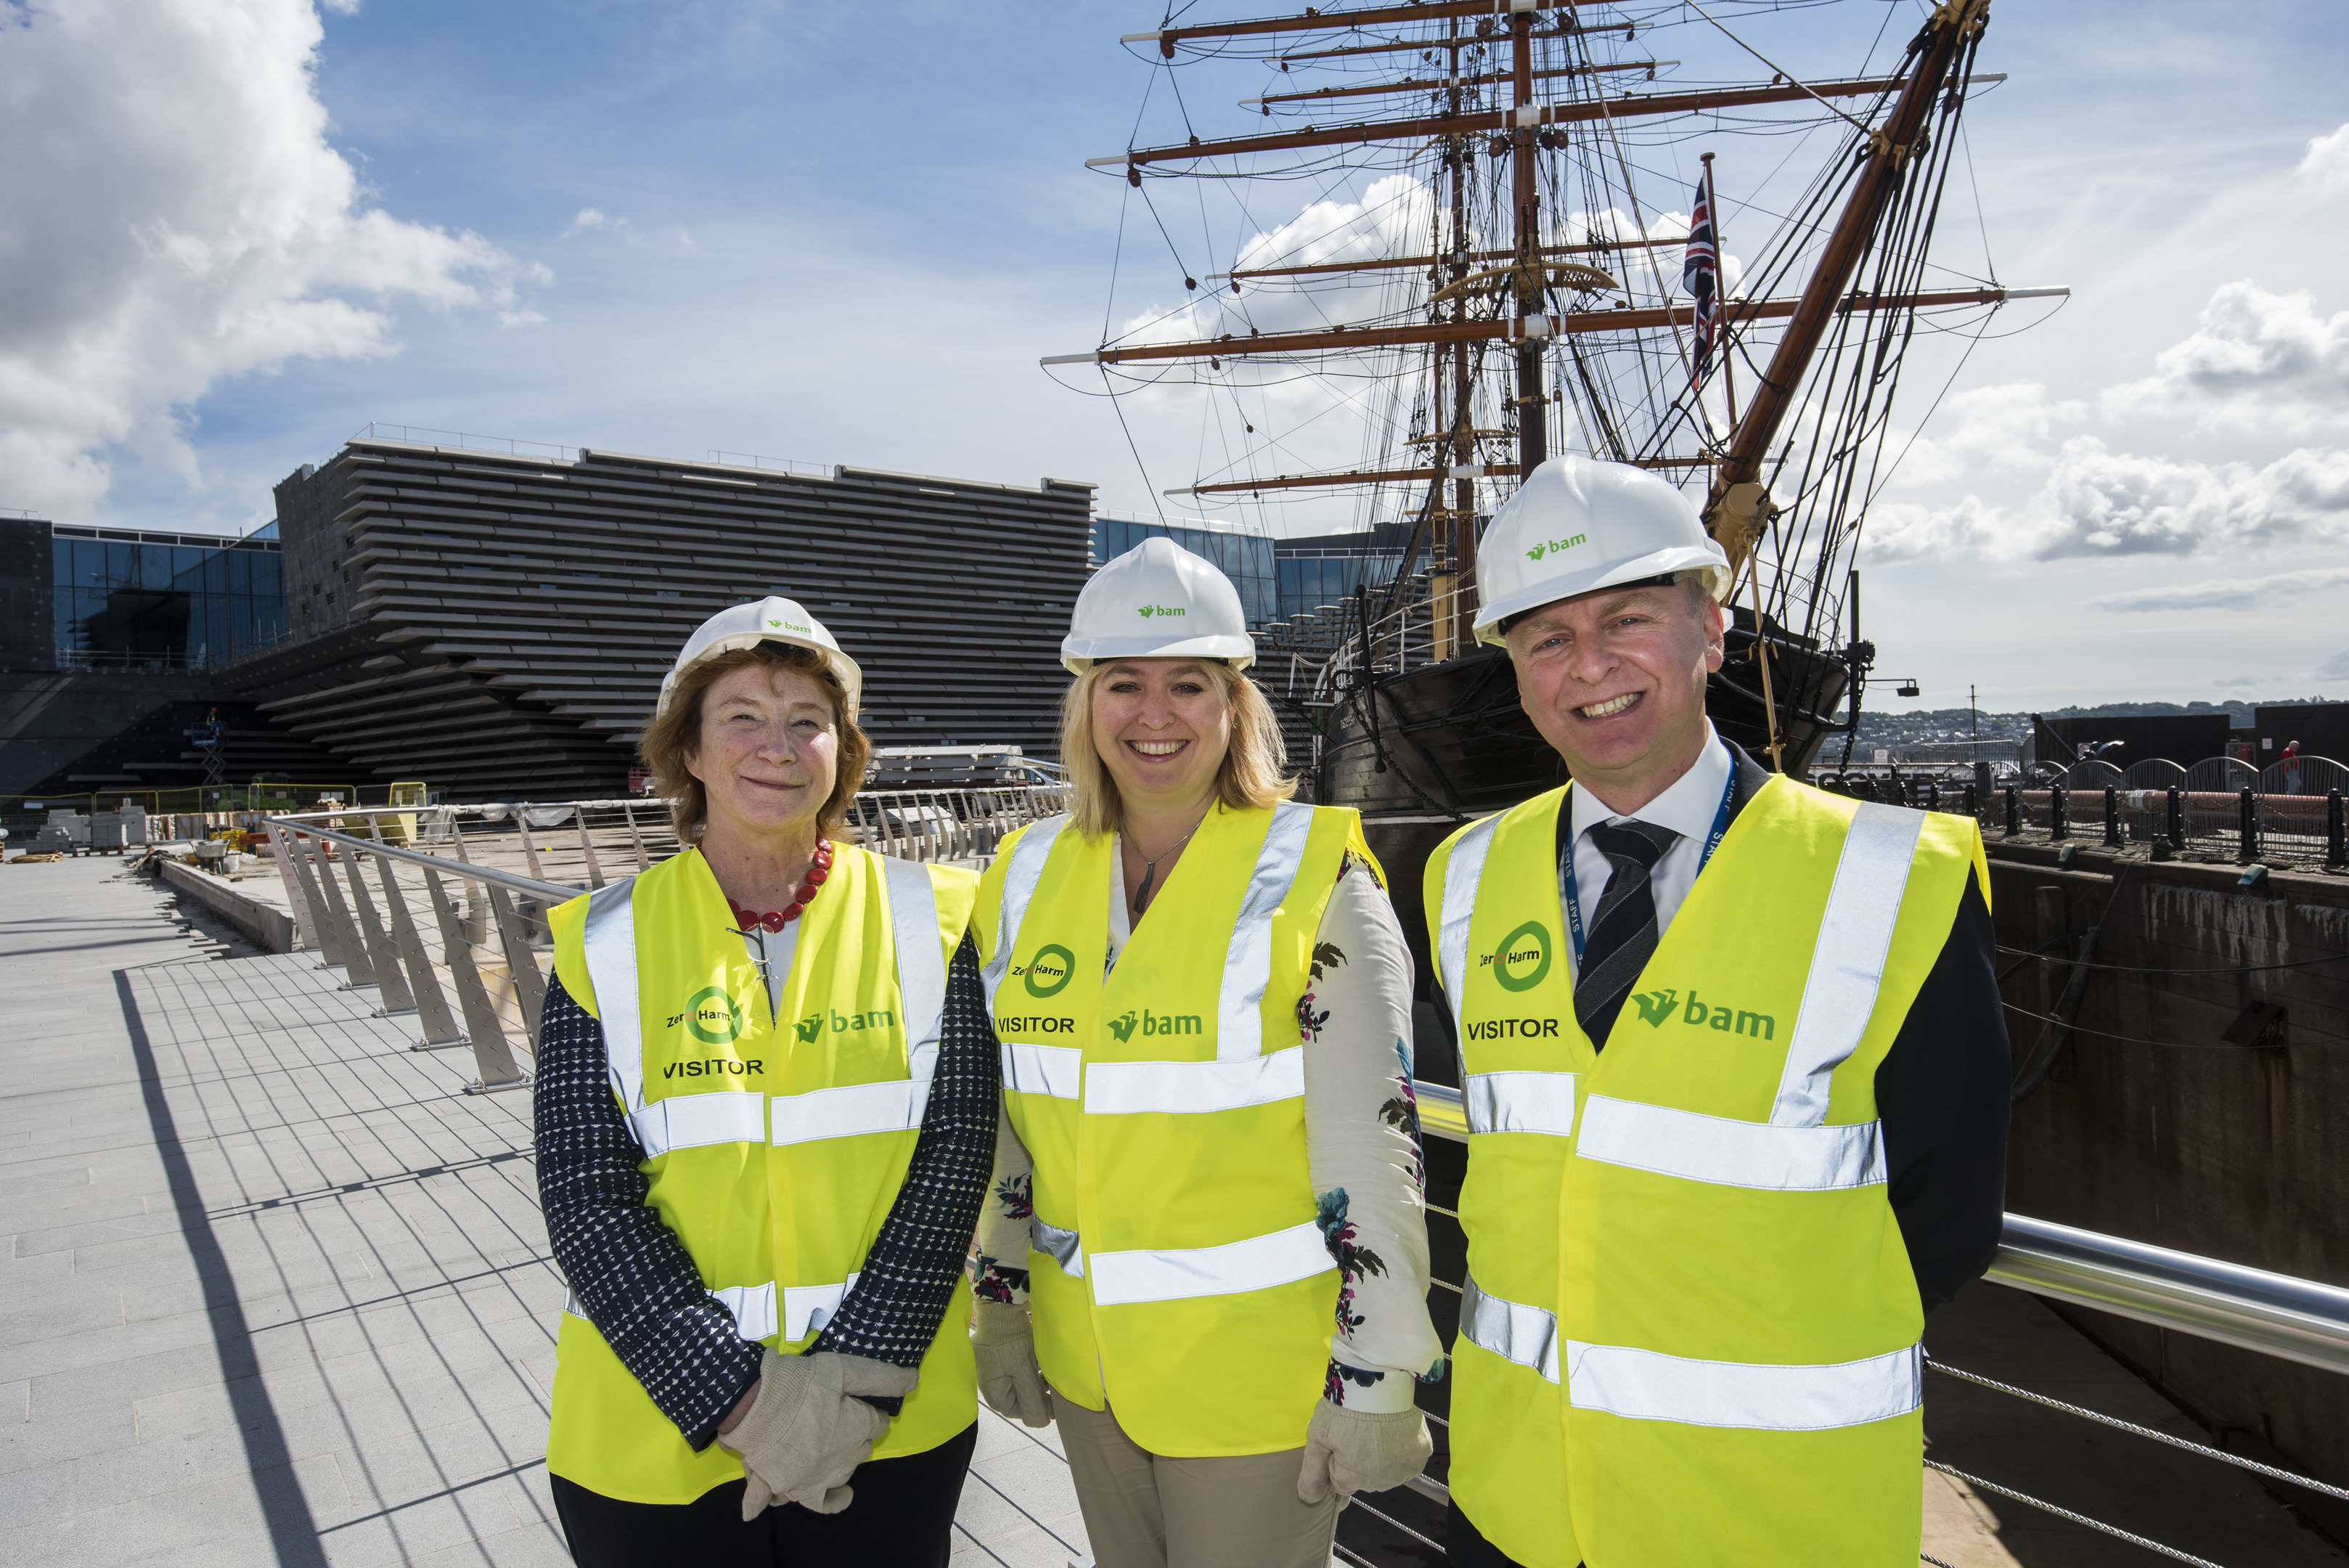 Karen Bradley MP, Secretary of State for Digital Culture Media and Sport tours the V&;A Dundee construction site with Philip Long  and Lesley Knox, chairman of the board of The V&A Museum.